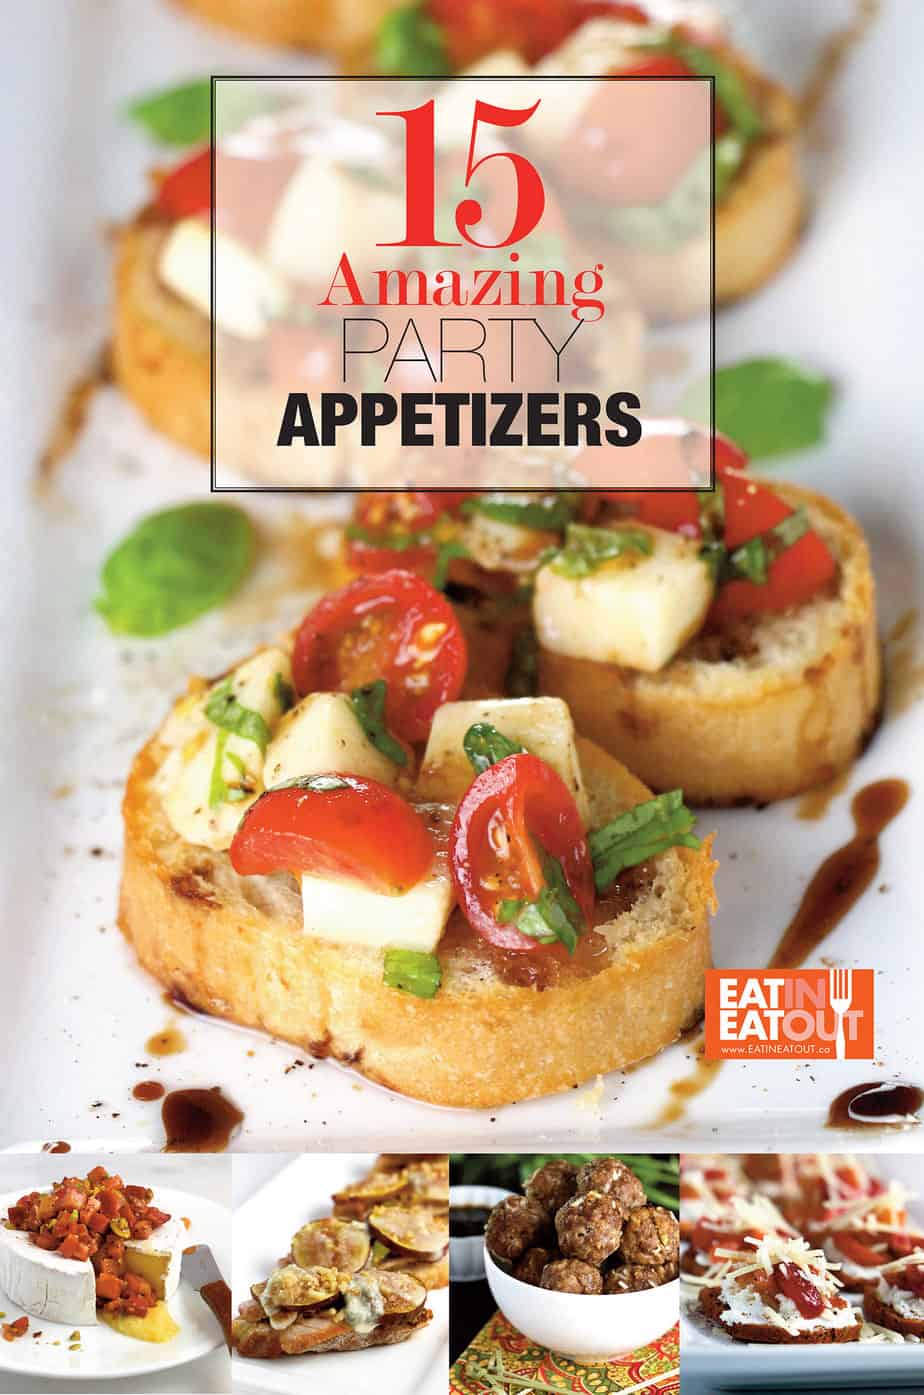 15-amazing-party-appetizers